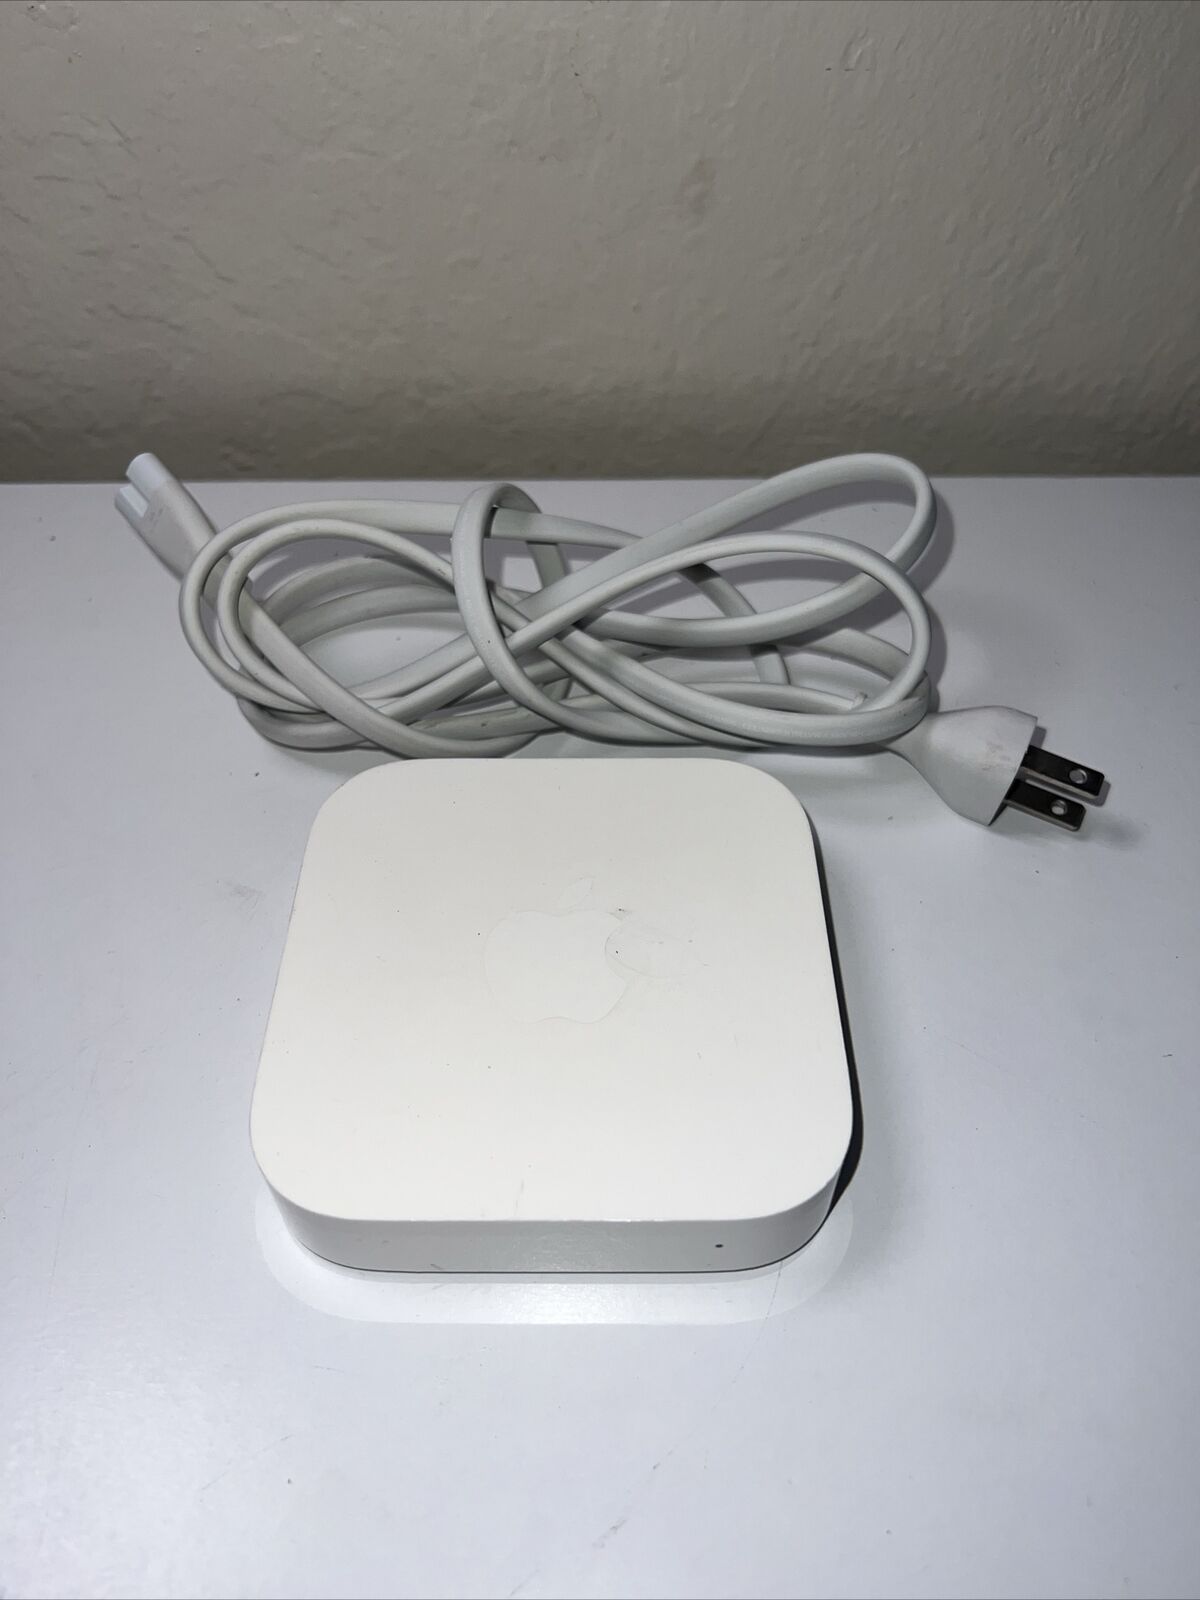 Apple AirPort Express Base Station (2nd Gen) Model A1392 WiFi Router